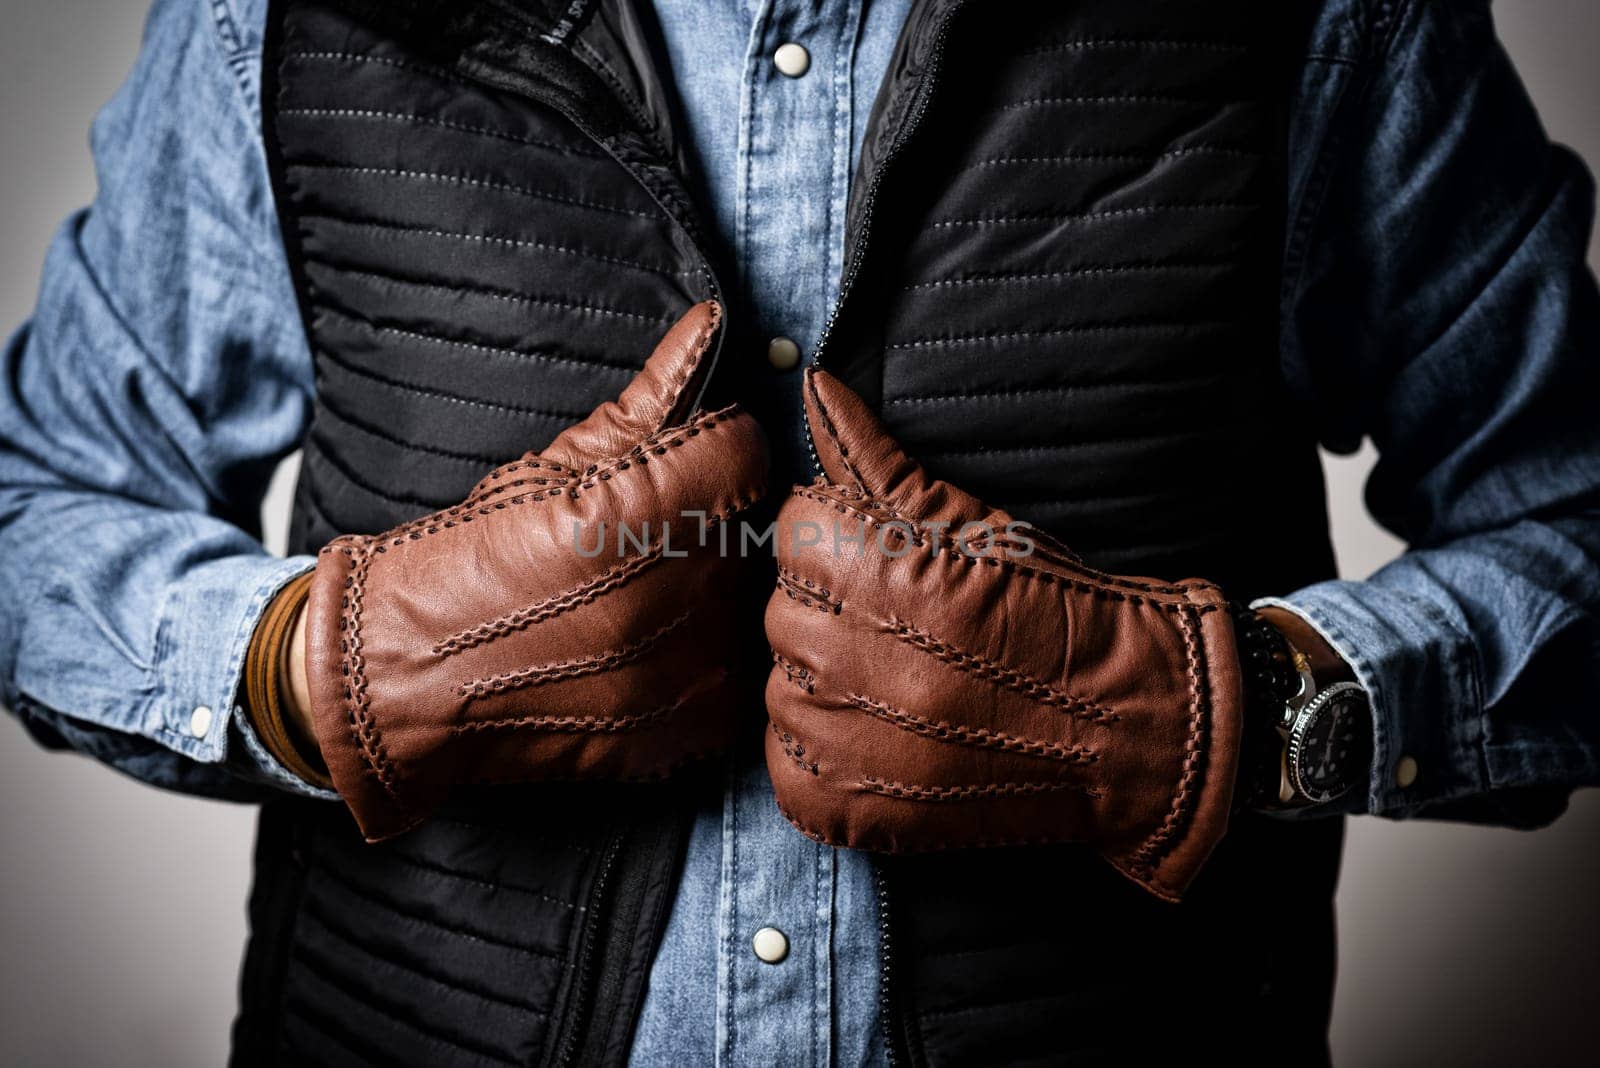 wearing the gloves by norgal